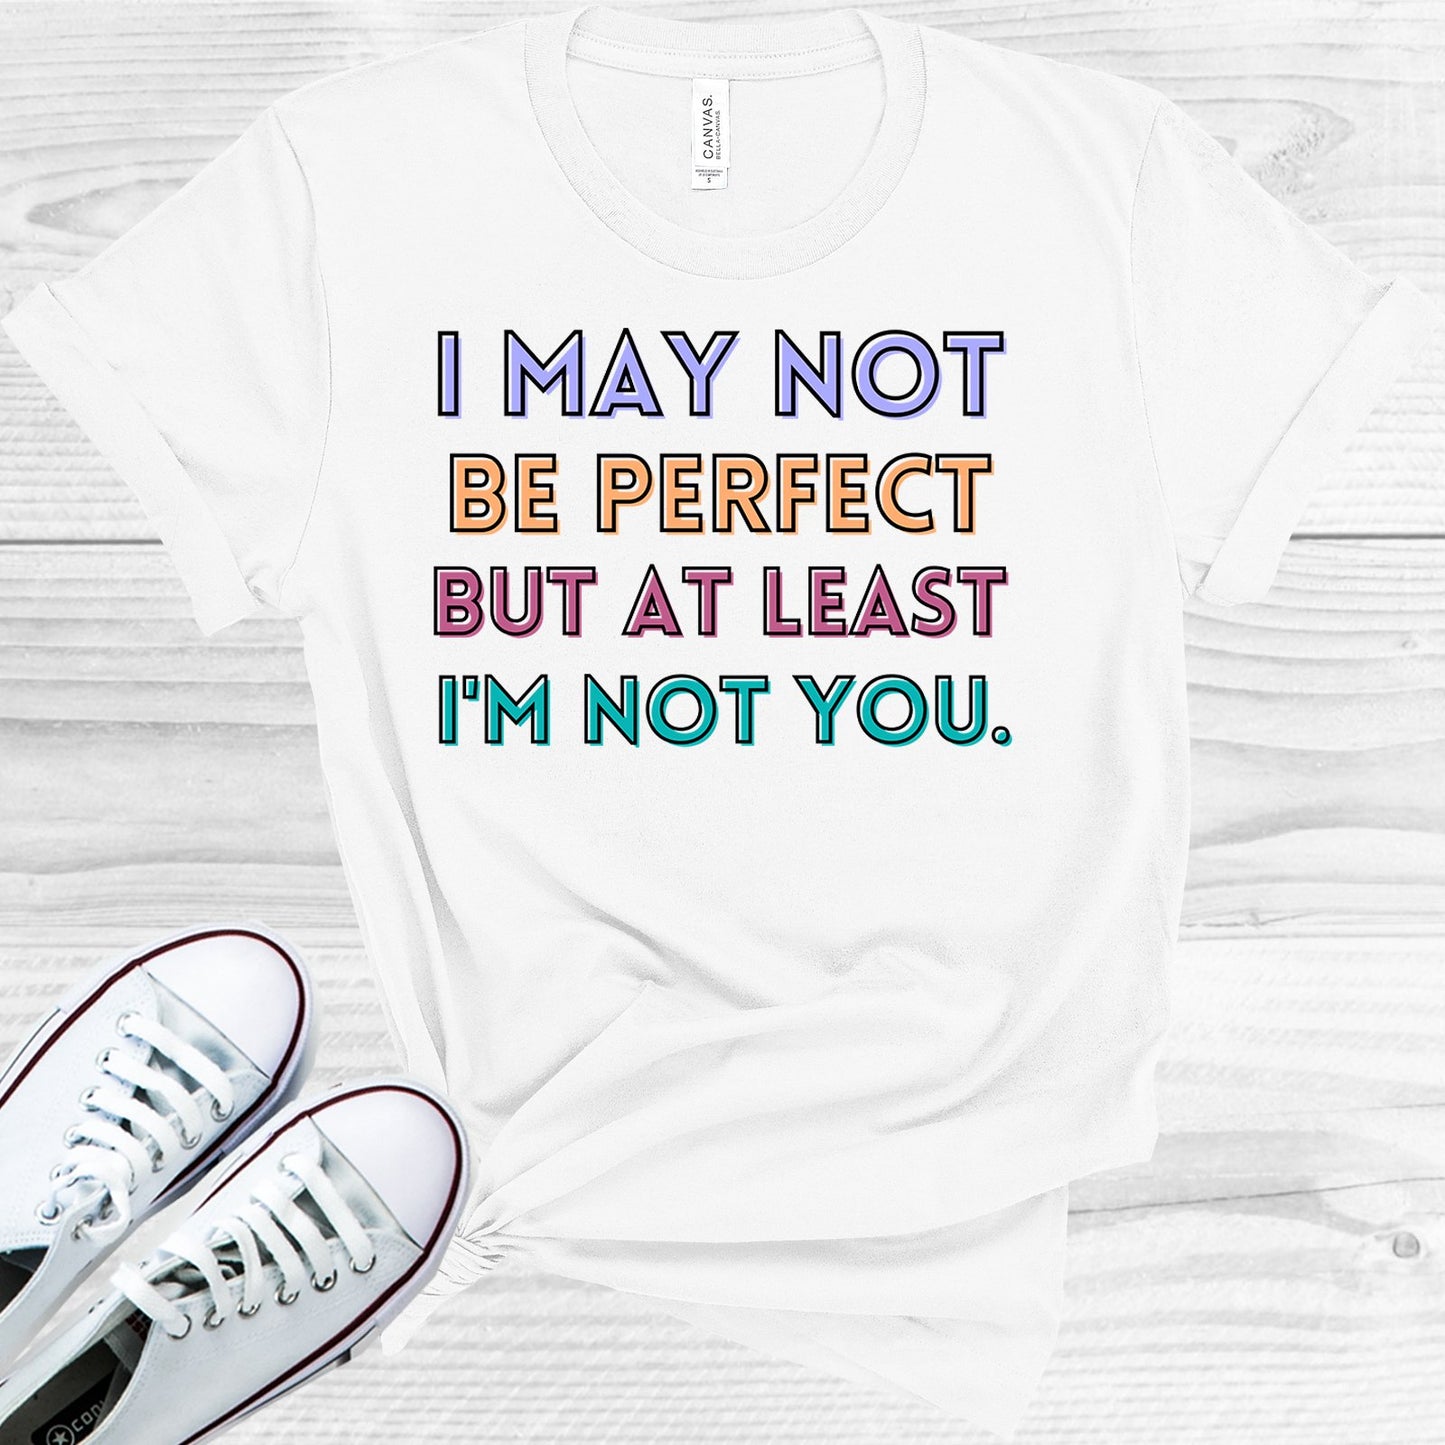 I May Not Be Perfect But At Least Im You Graphic Tee Graphic Tee